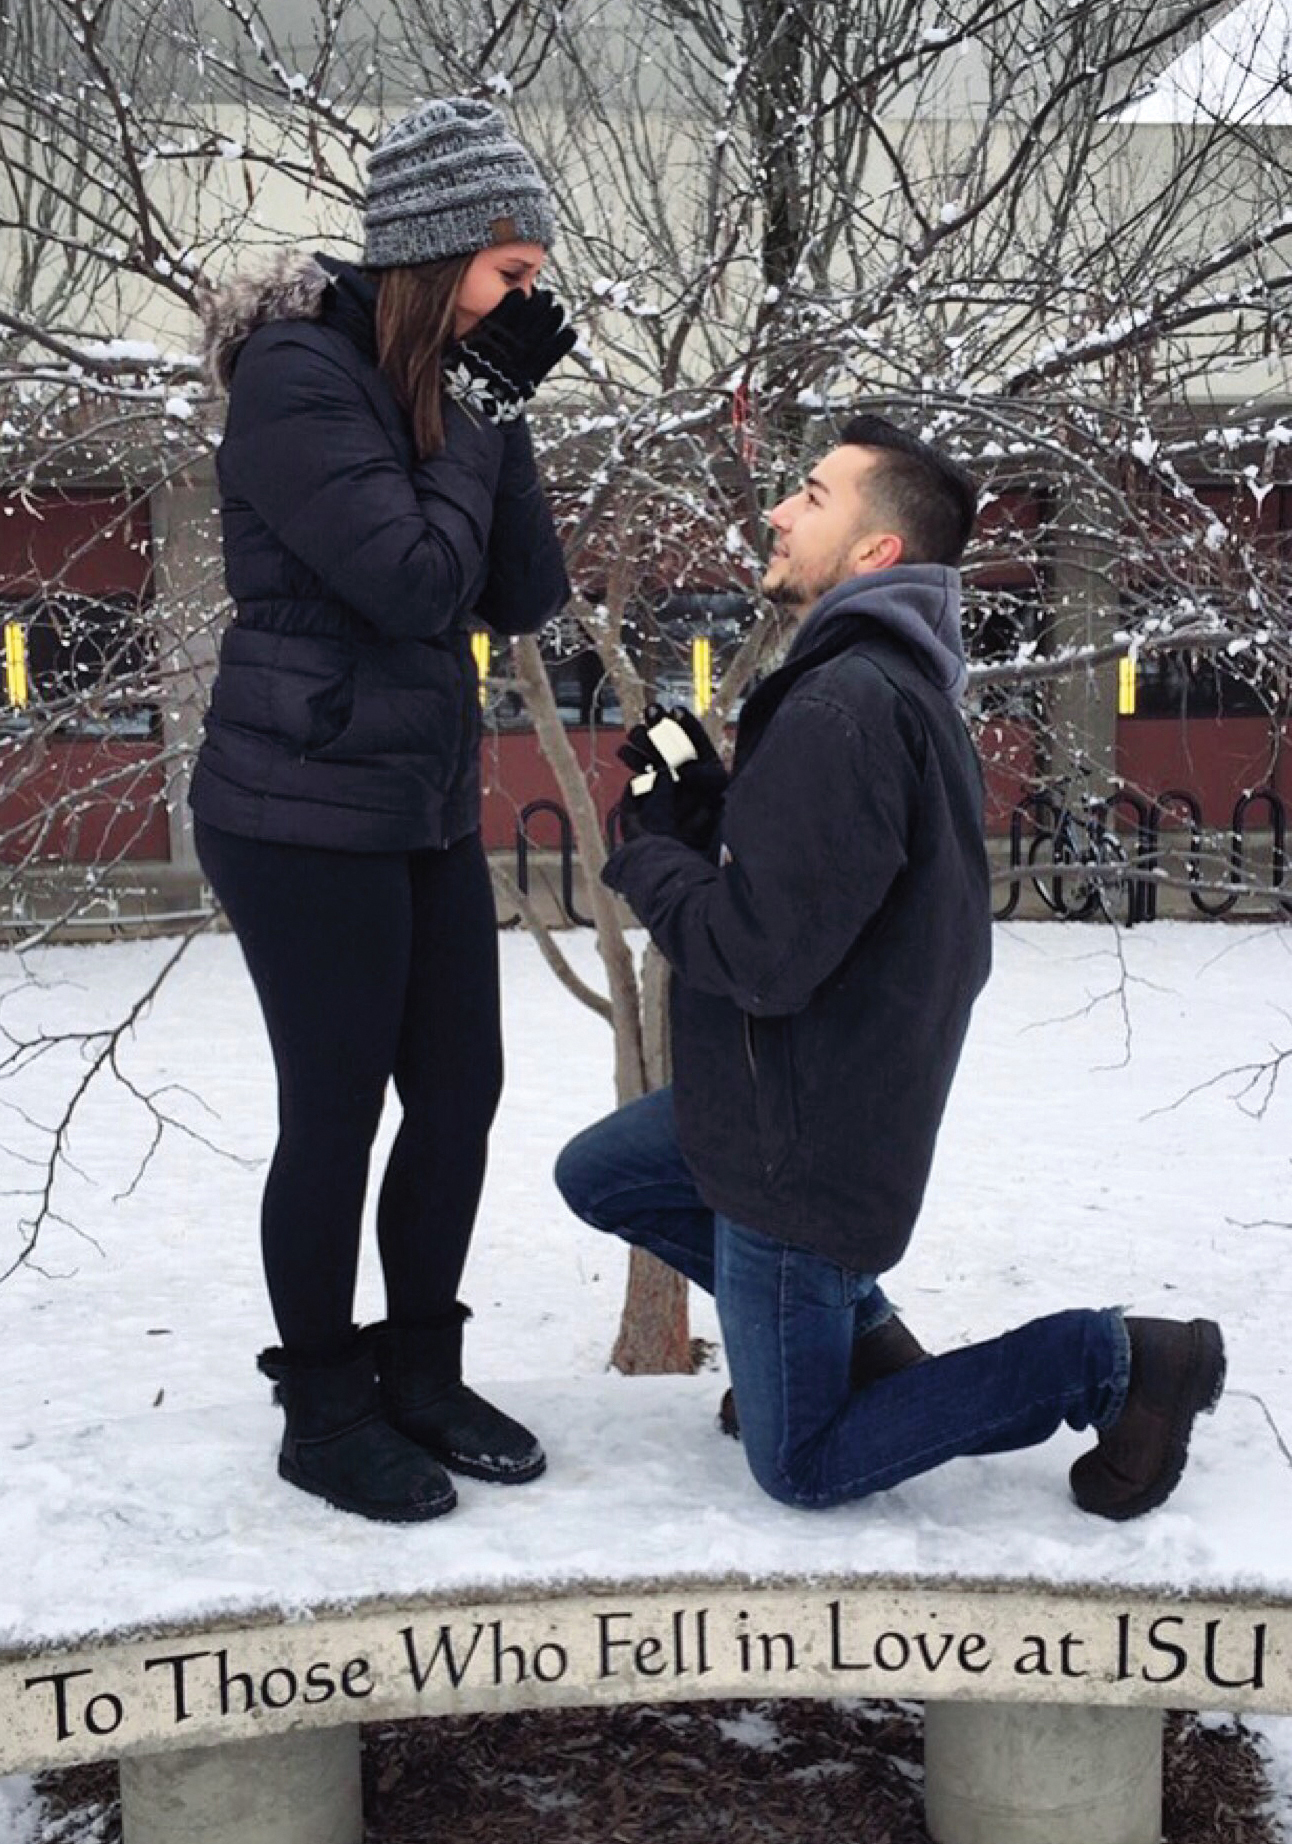 Brian Walker proposed to Kaitlyn Zagurski on the love bench.